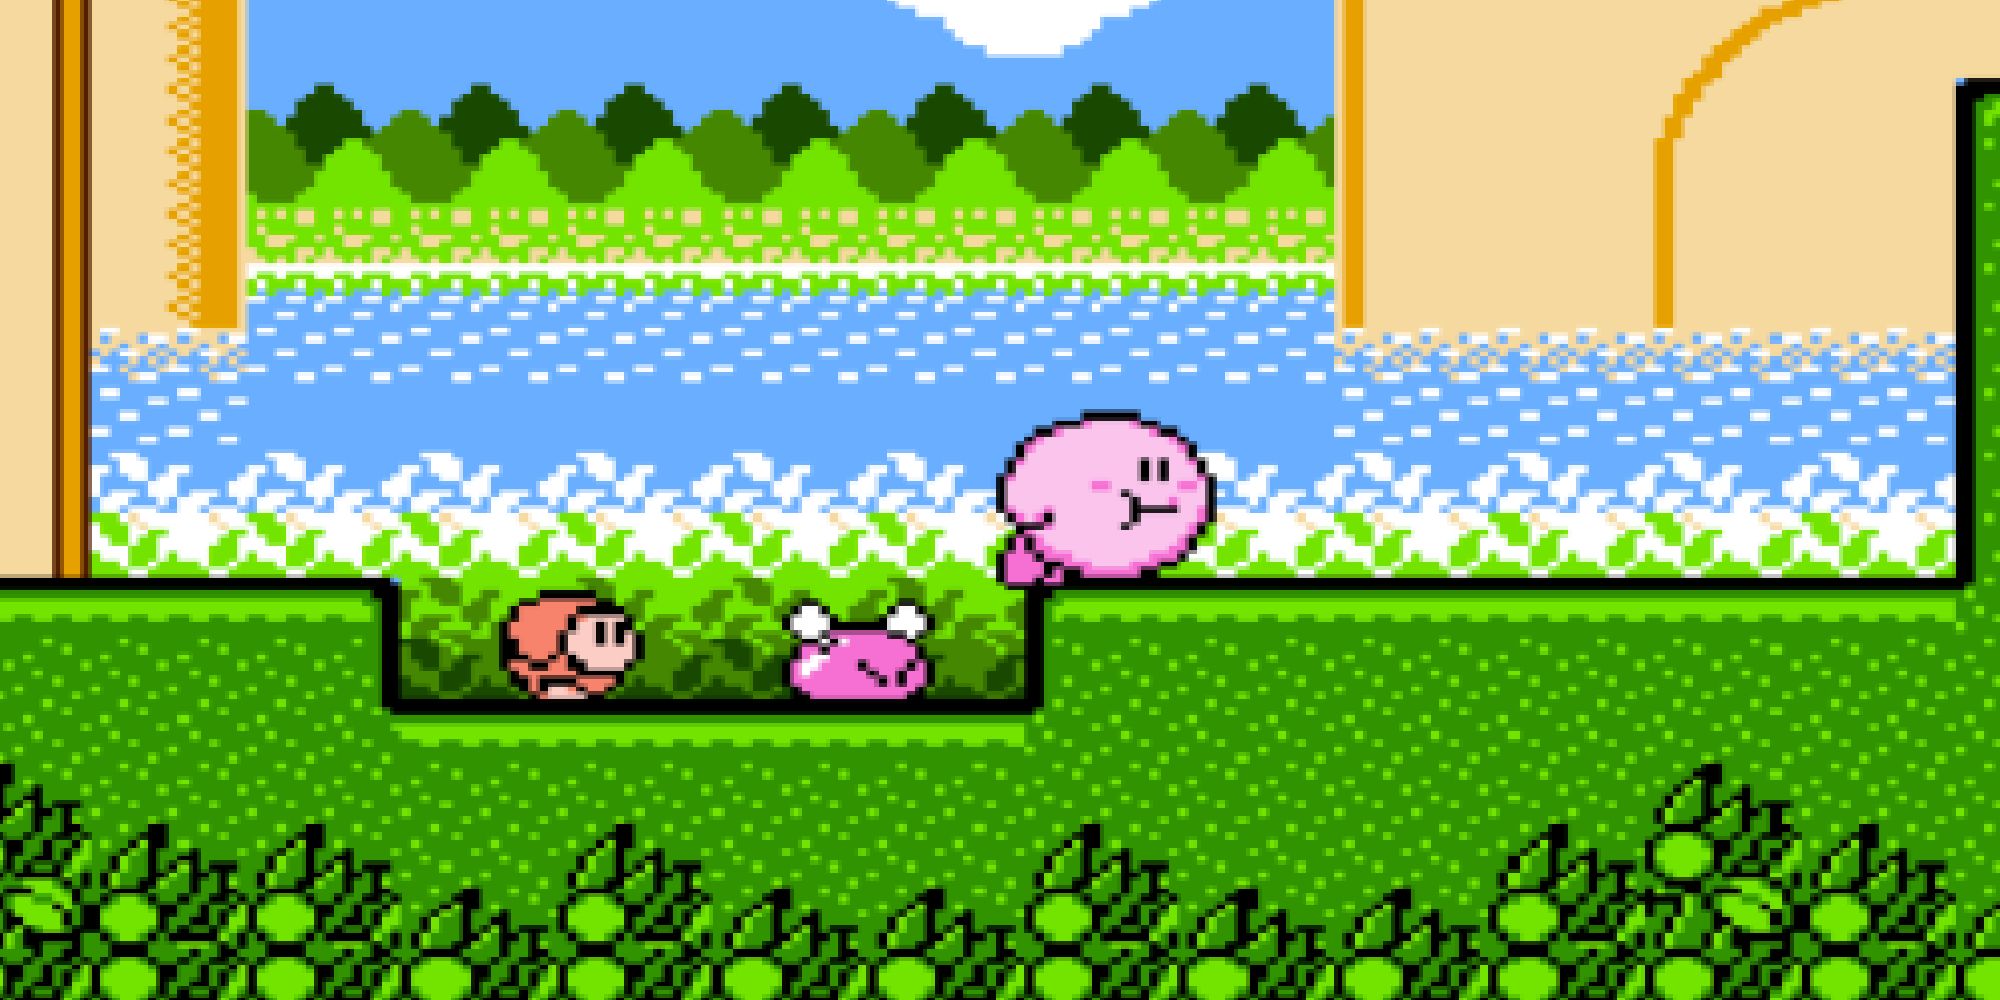 A puffed up Kirby on the ground in Kirby's Adventure